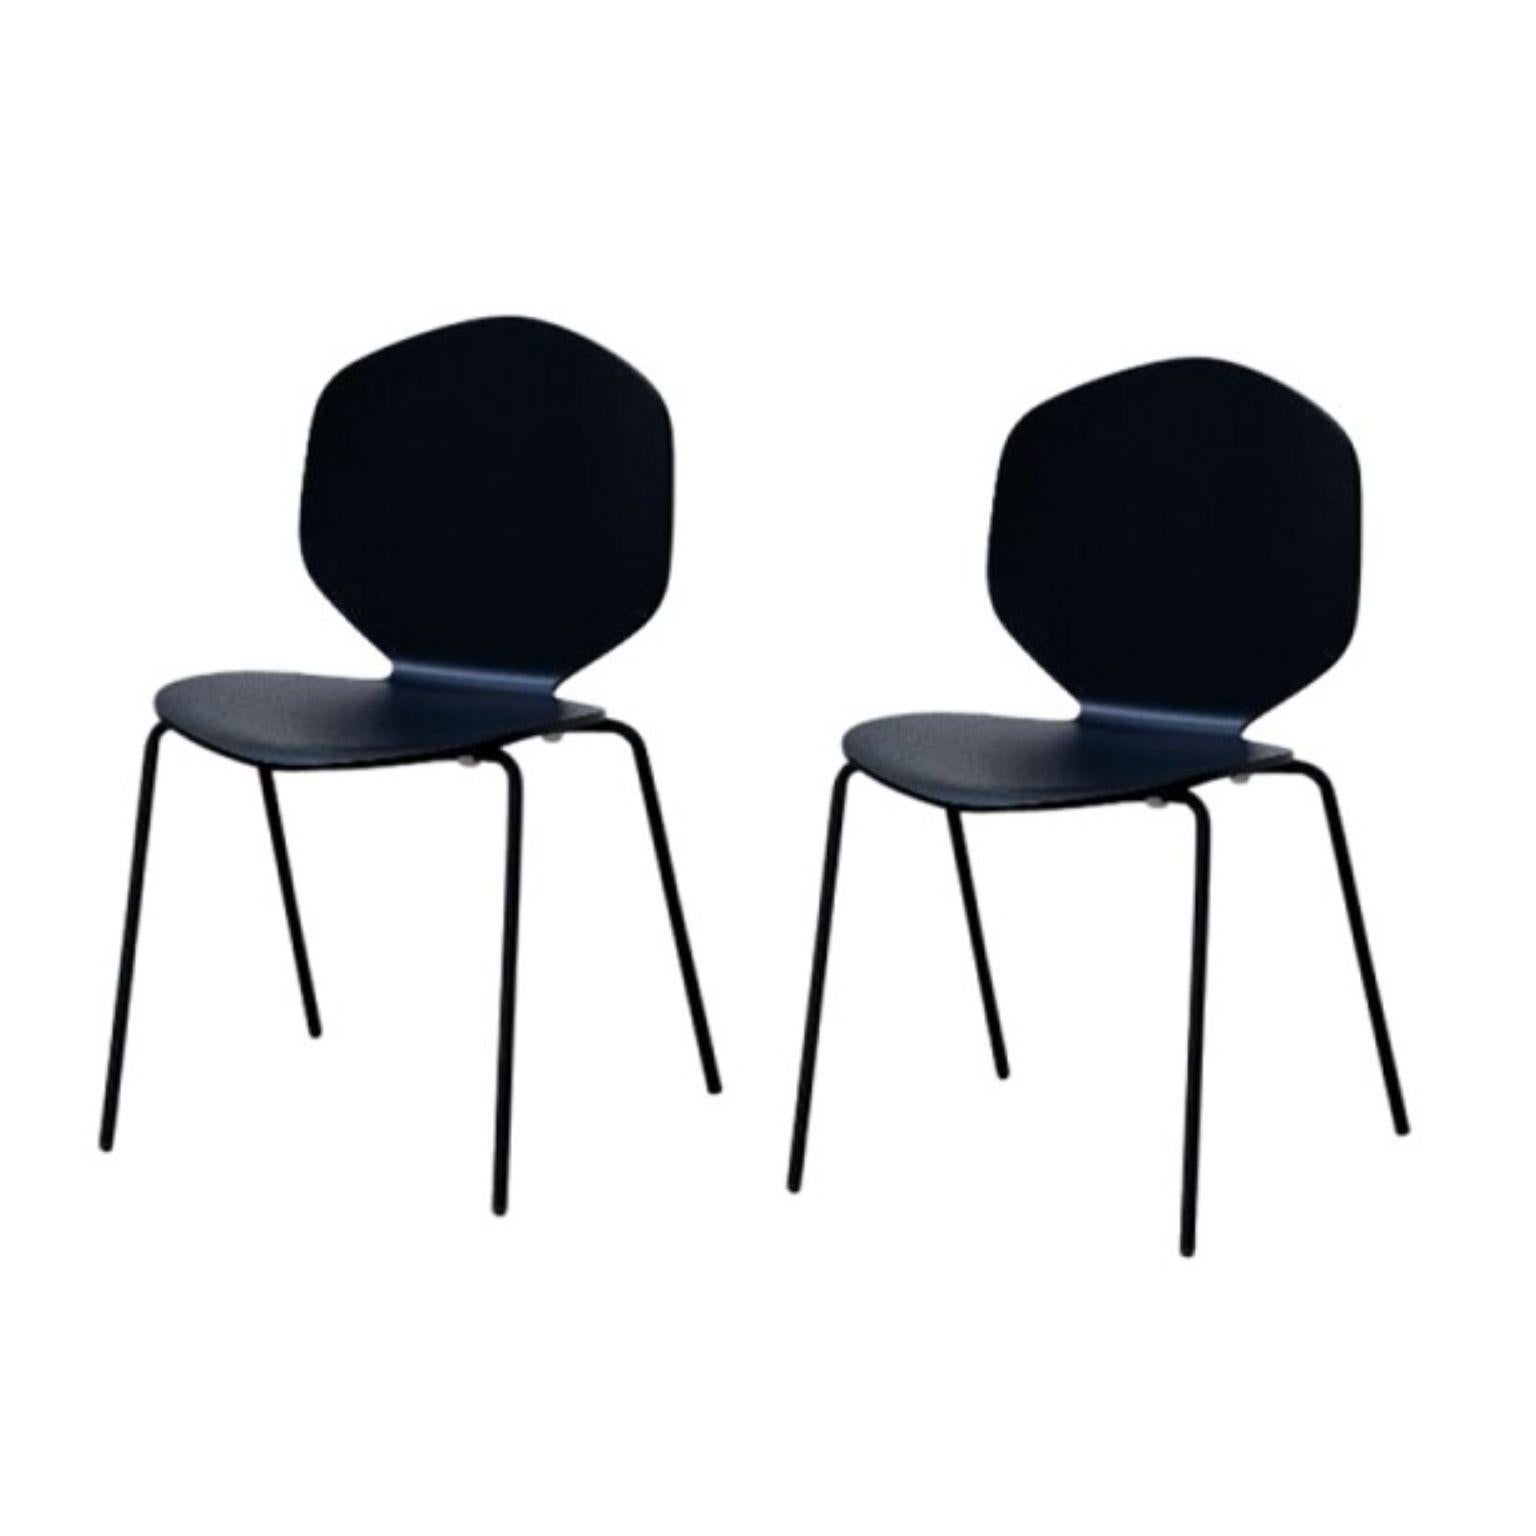 Set of 2 LouLou chairs by Shin Azumi
Materials: base in black or white or chromed lacquered metal, seat and back in natural oak veneer or black or white stained. 
Technique: Lacquered metal, natural and stained wood. 
Dimensions: D 45 x W 47 x H